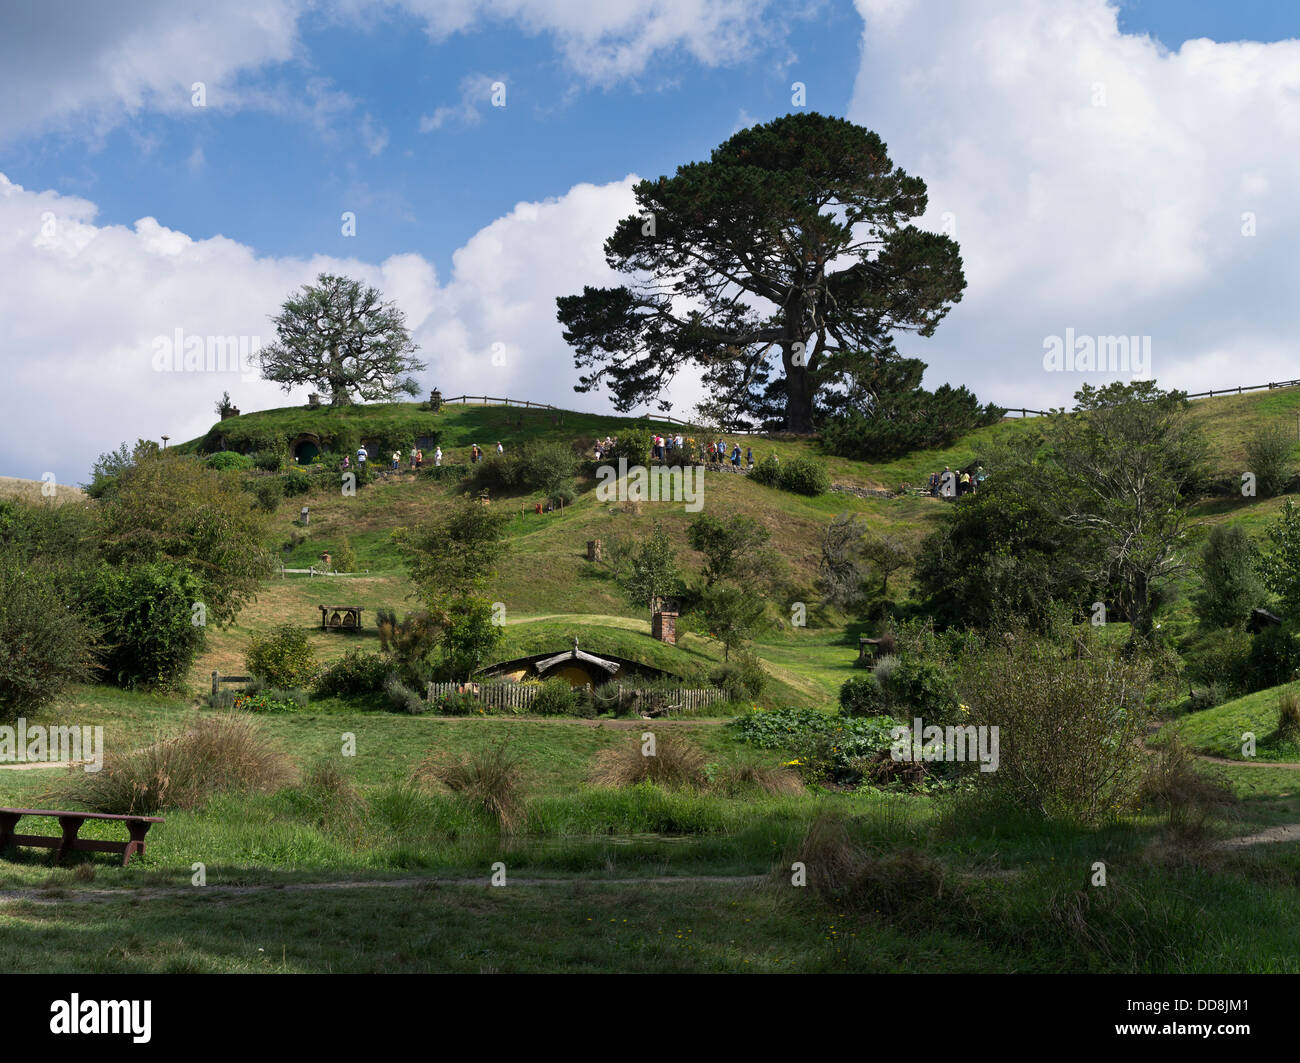 dh Lord of the Rings village HOBBITON NEW ZEALAND Hobbits tours film set movie site films people tourism hobbit tour middle eart Stock Photo